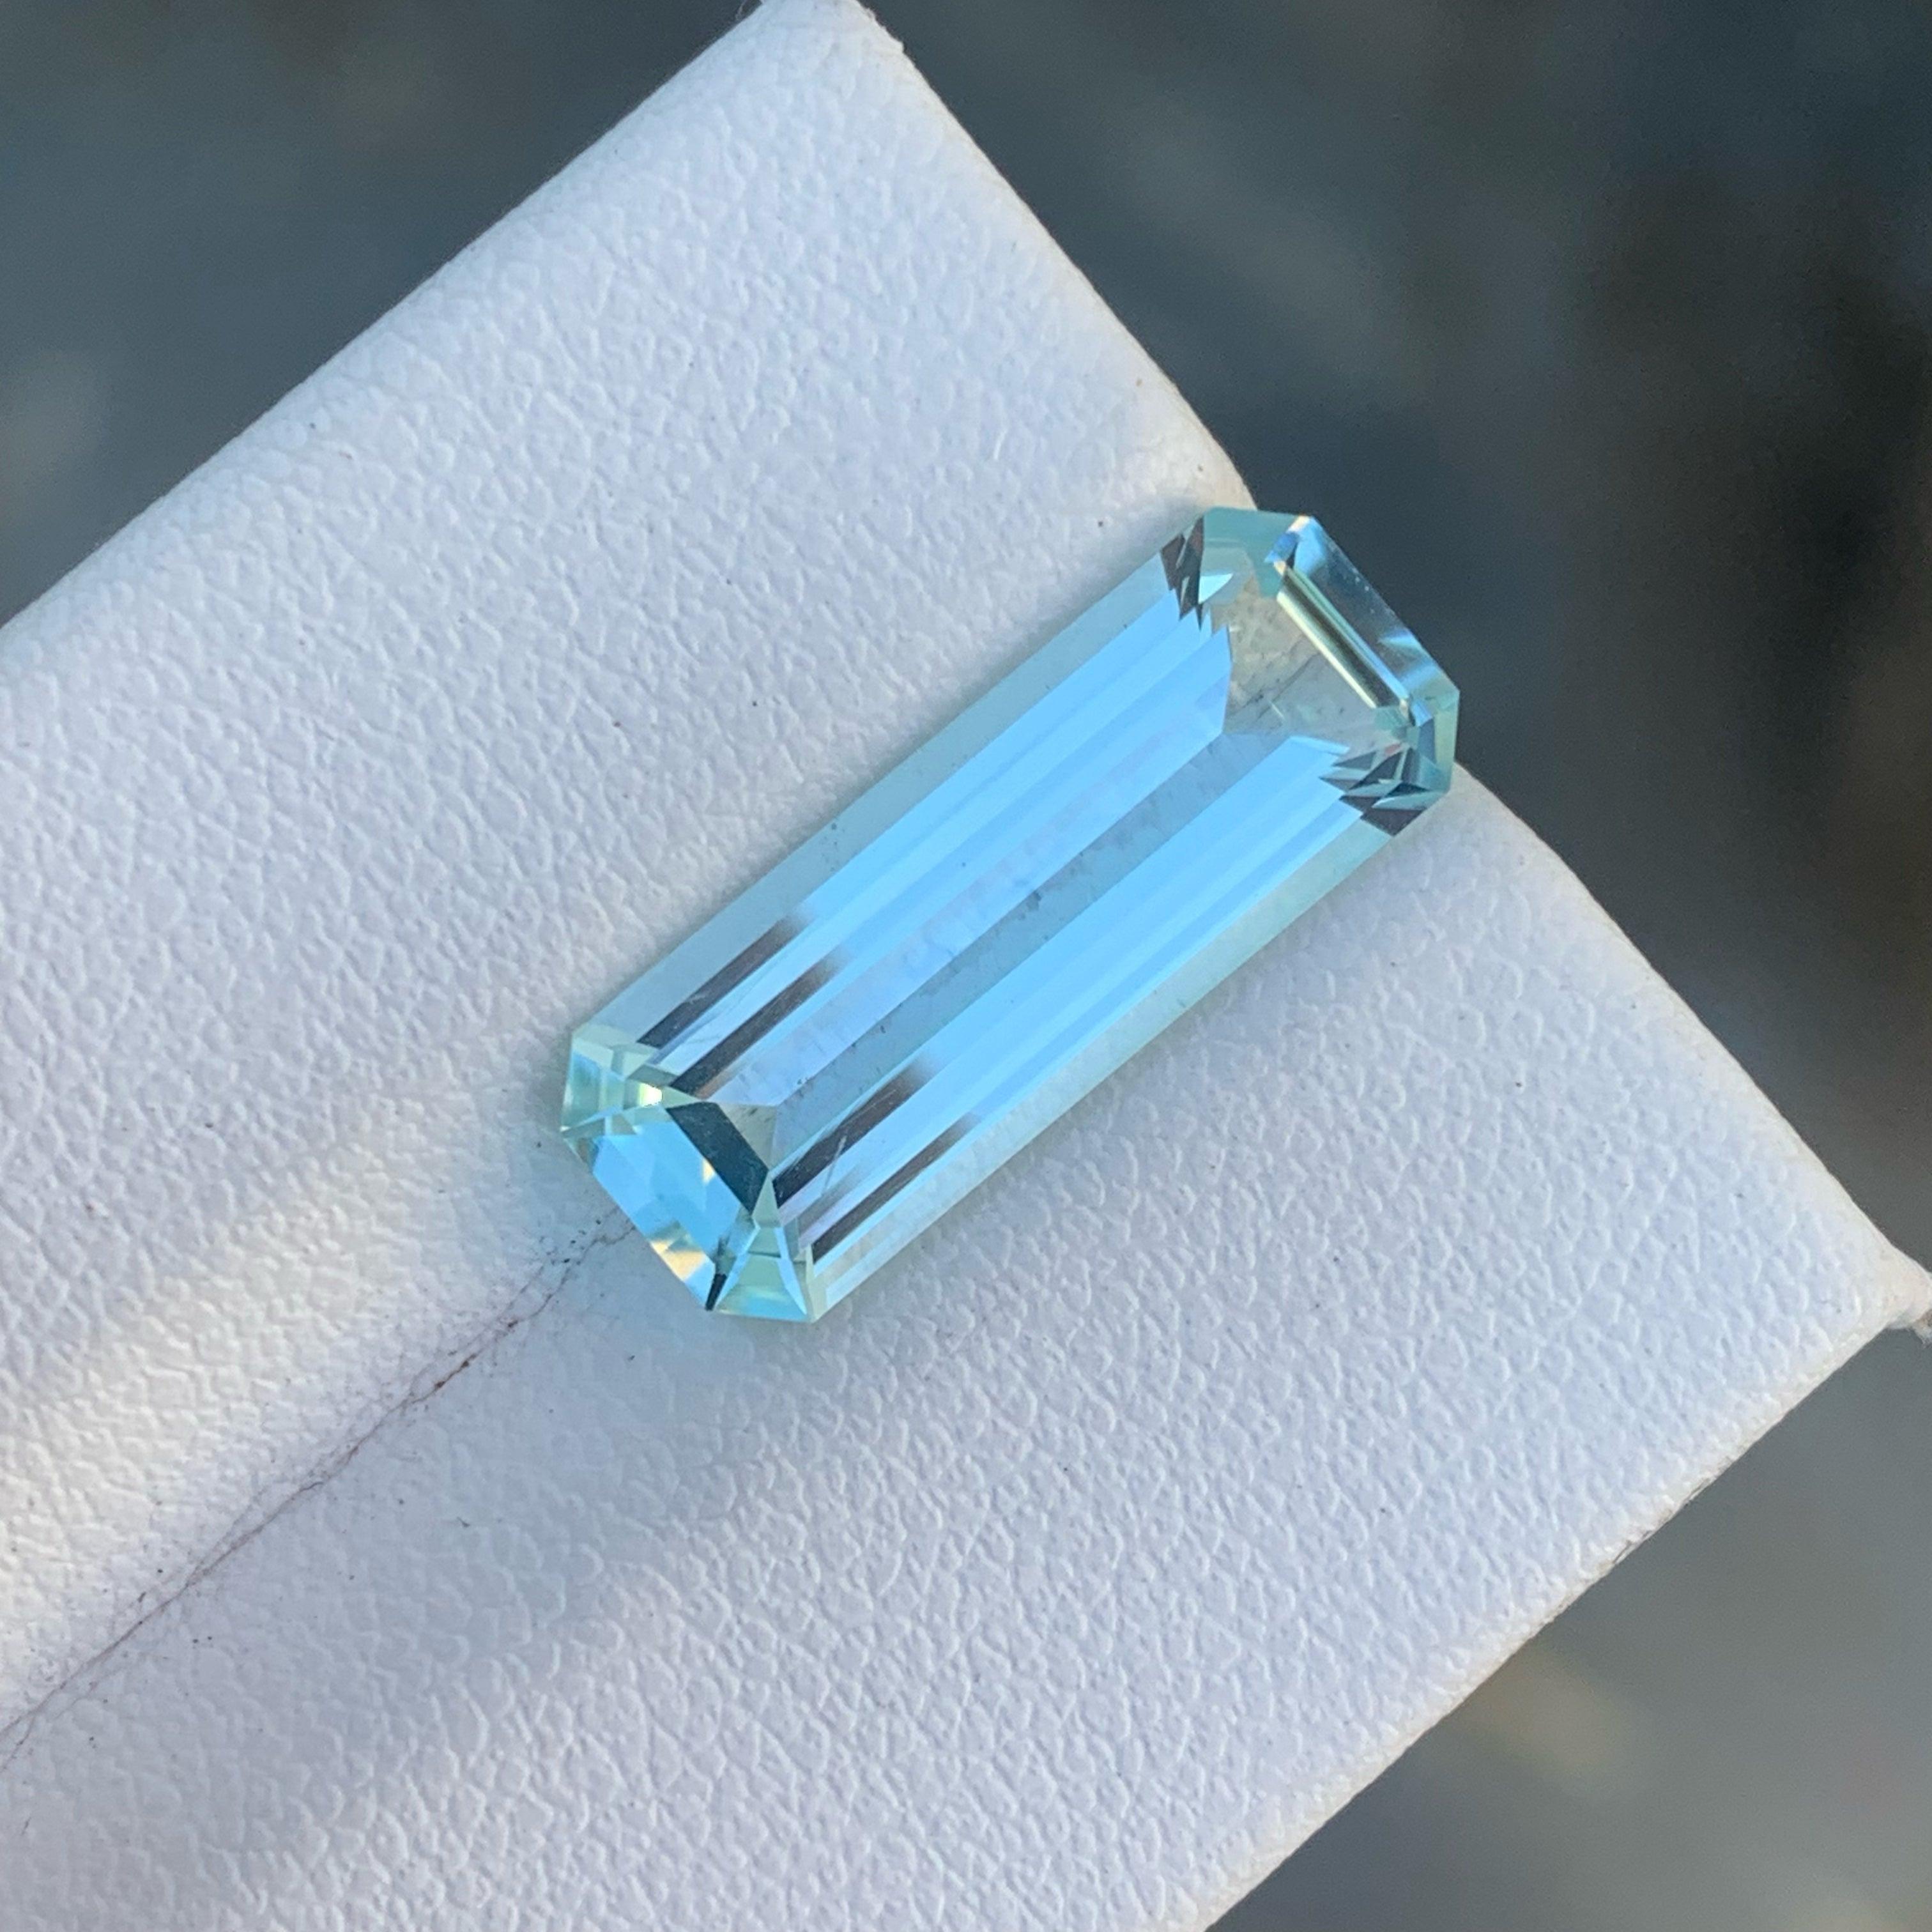 Incredible Sky blue Aquamarine Cut Stone, Available for sale at wholesale price natural high quality 4.80 Carats  Natural Aquamarine from Pakistan.

Product Information:
GEMSTONE NAME: Incredible Sky blue Aquamarine Cut Stone
WEIGHT: 4.80